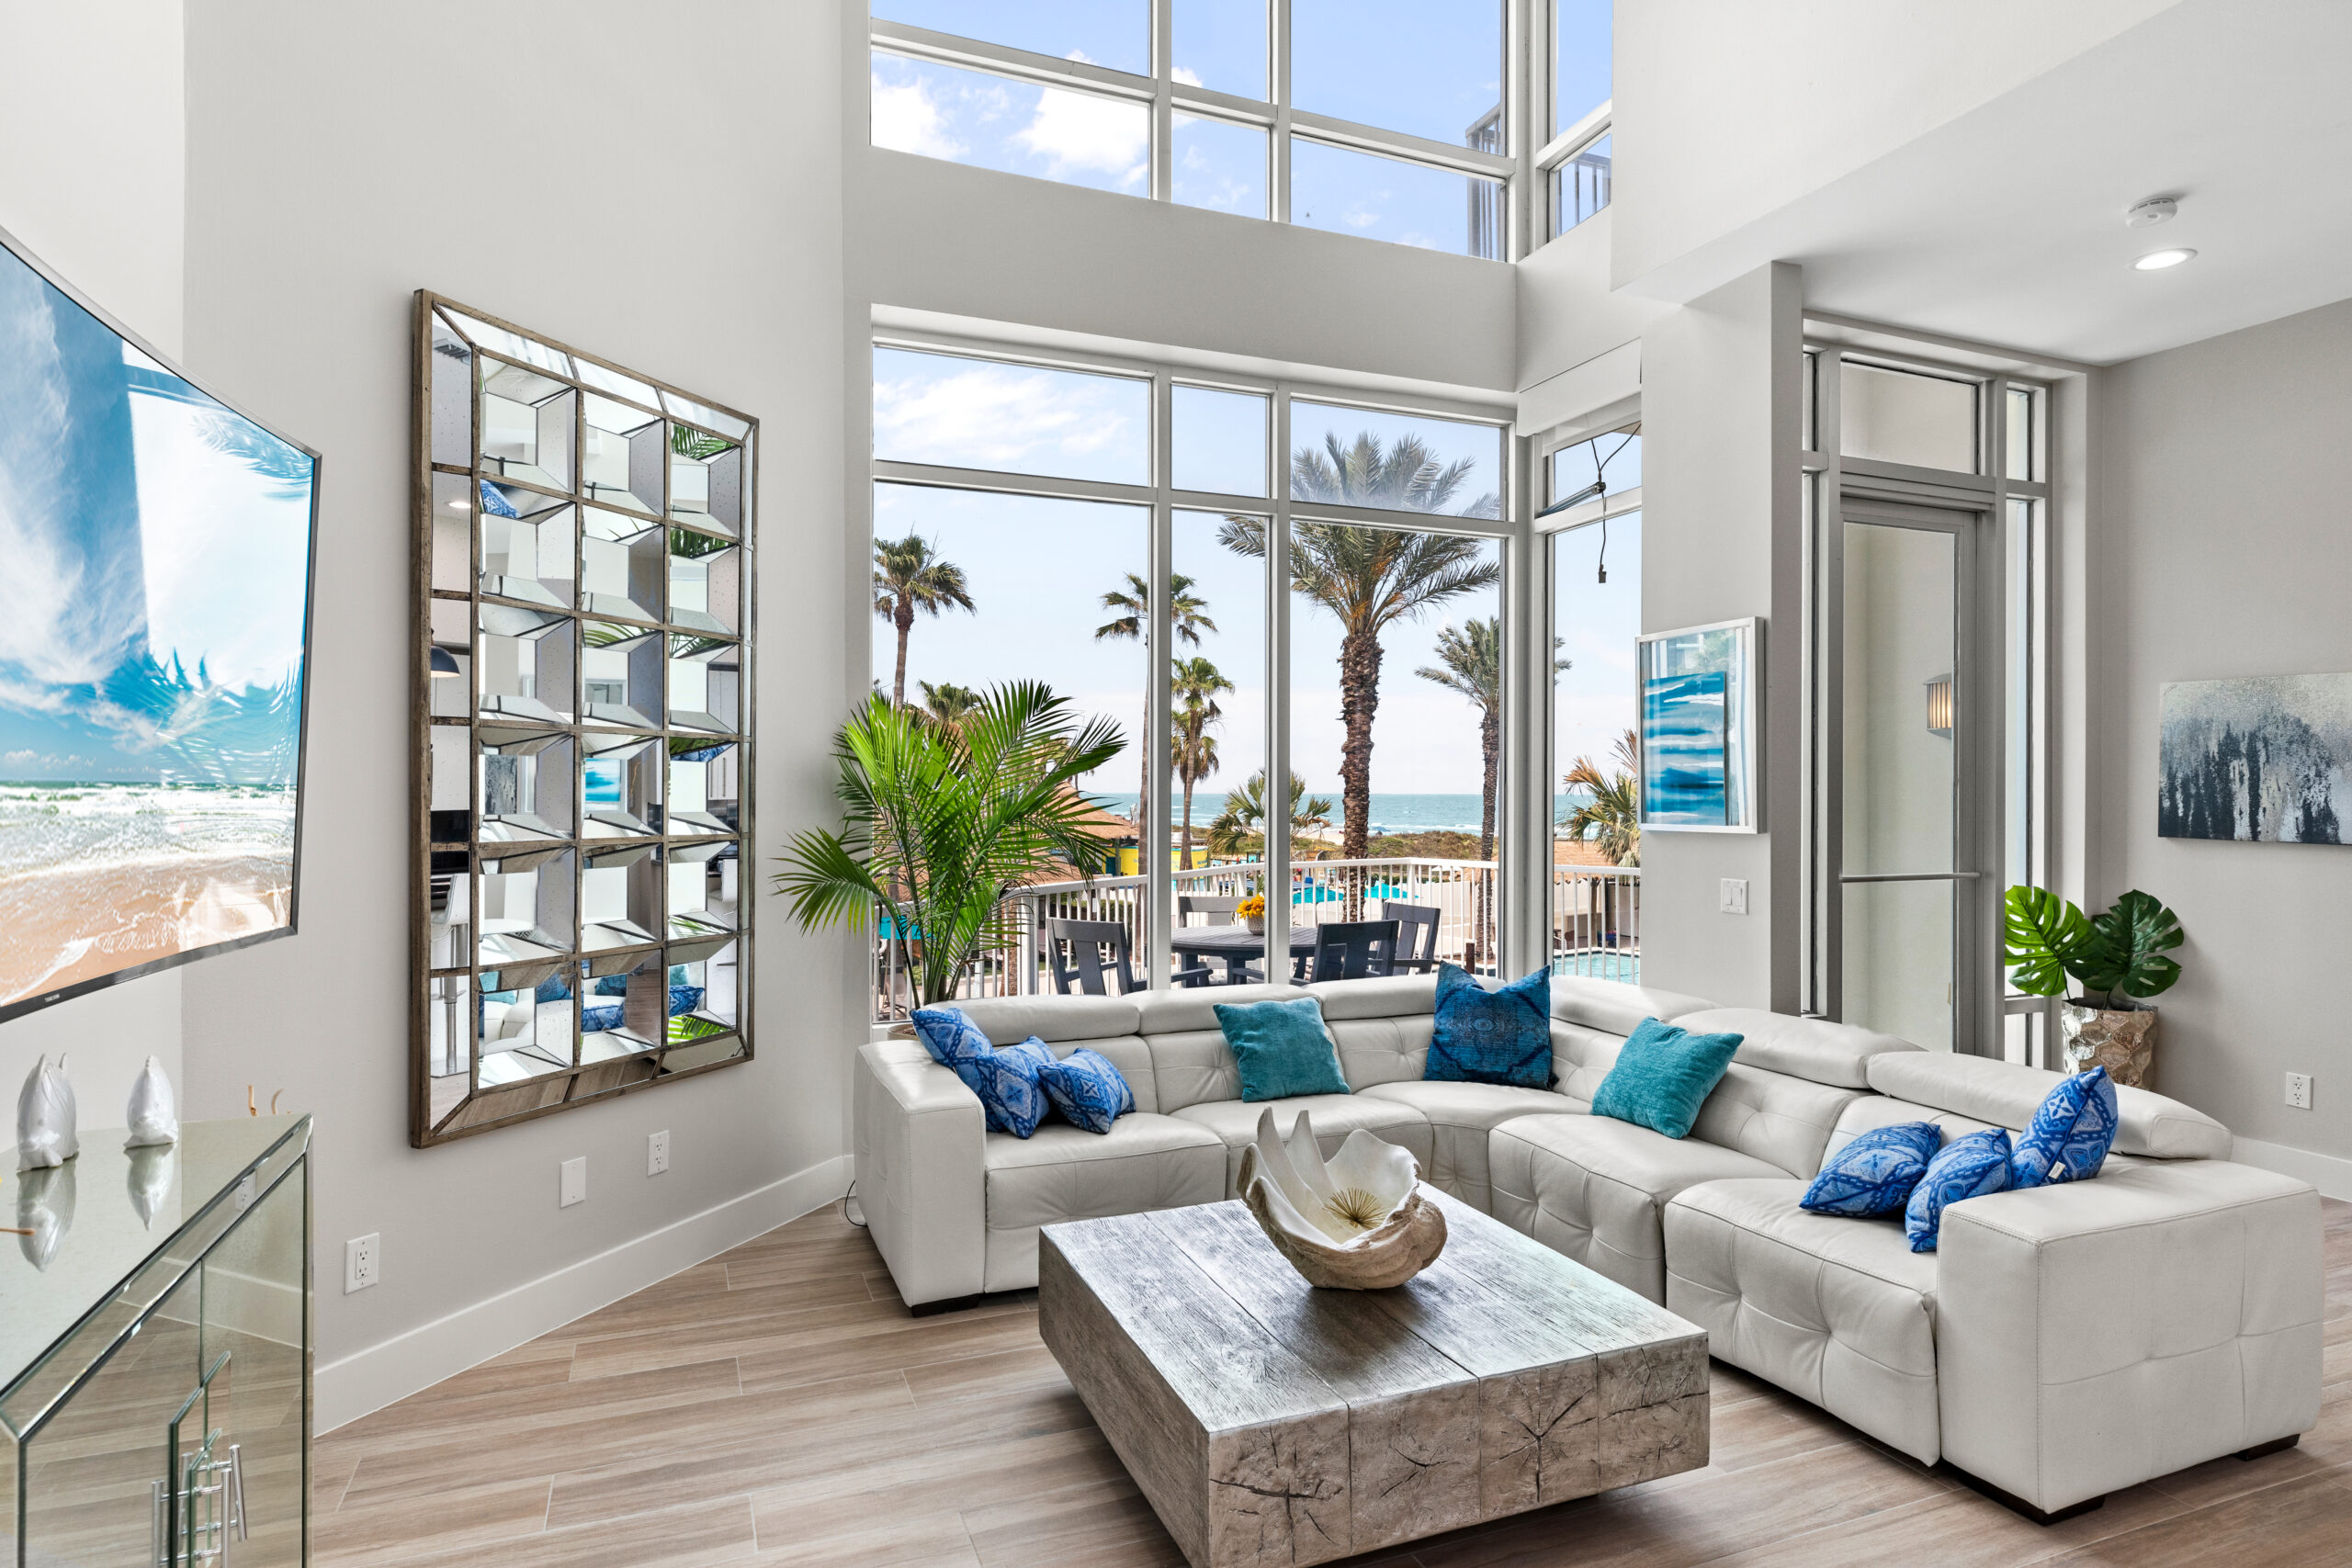 Featured image for “SOLD- The Sapphire Bungalow #108, South Padre Island, TX”